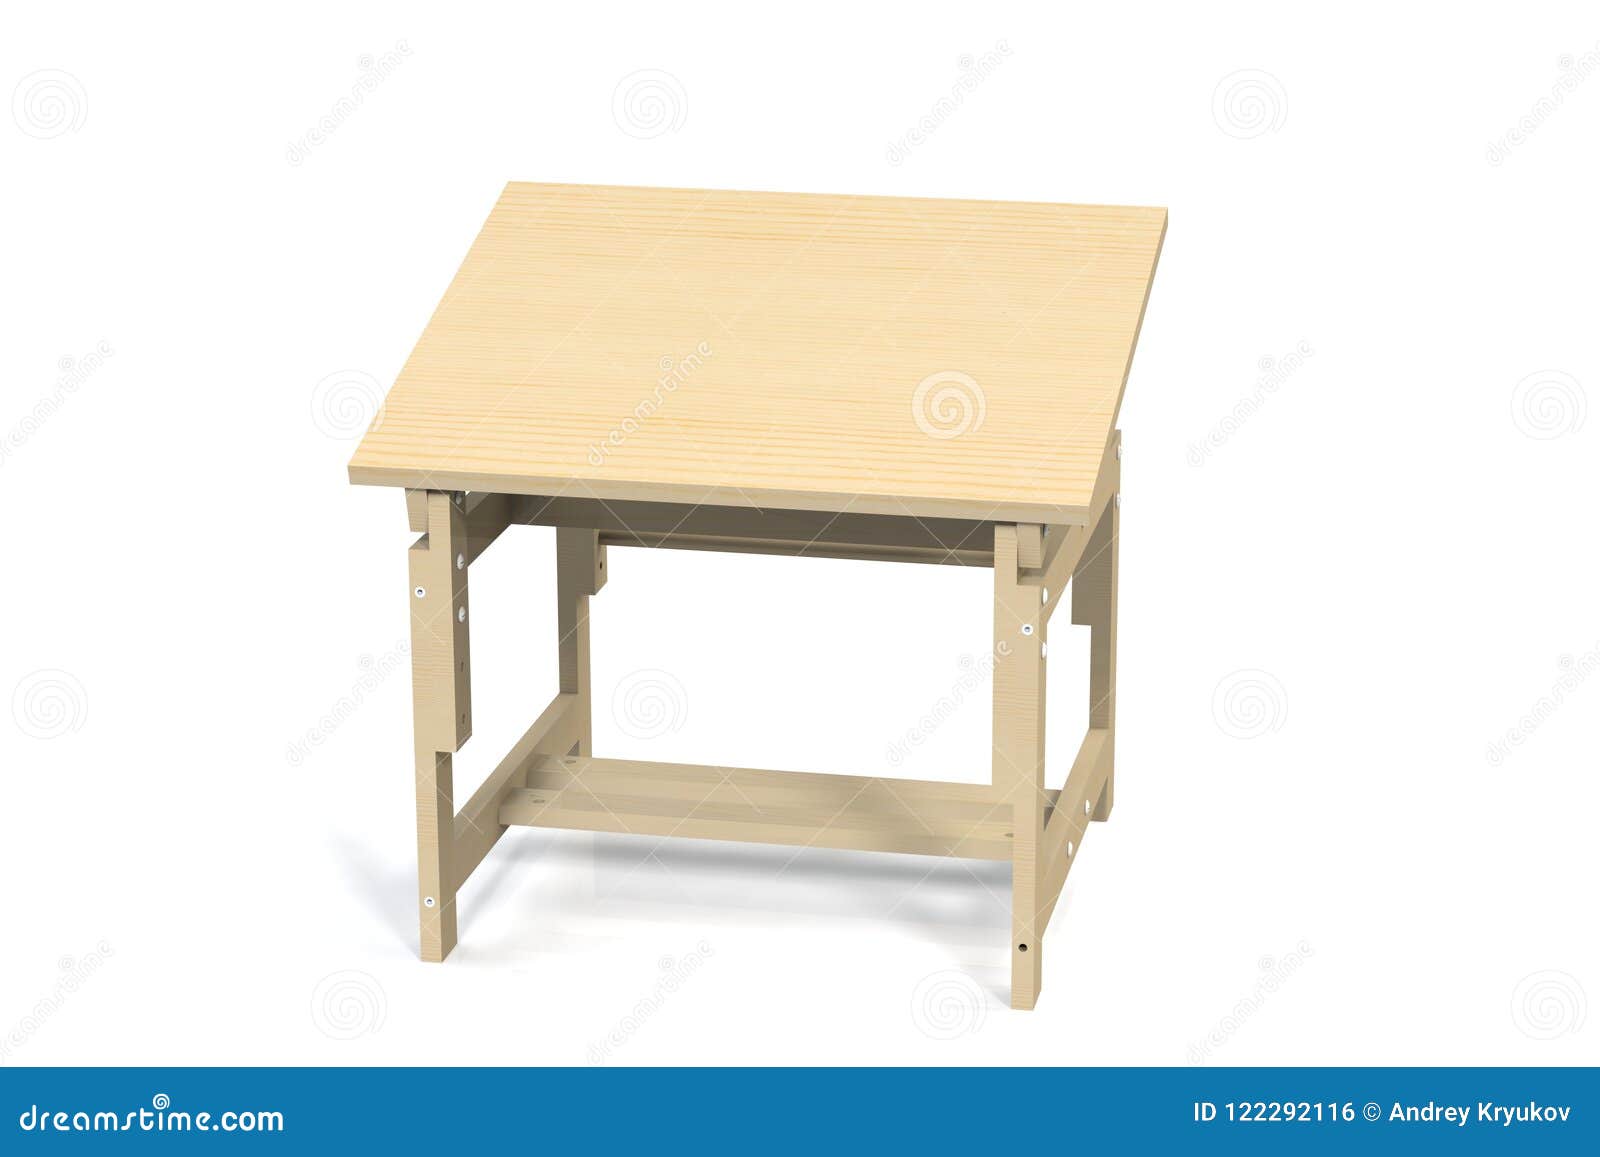 Children S Small Wooden Table On A White Background Isolate